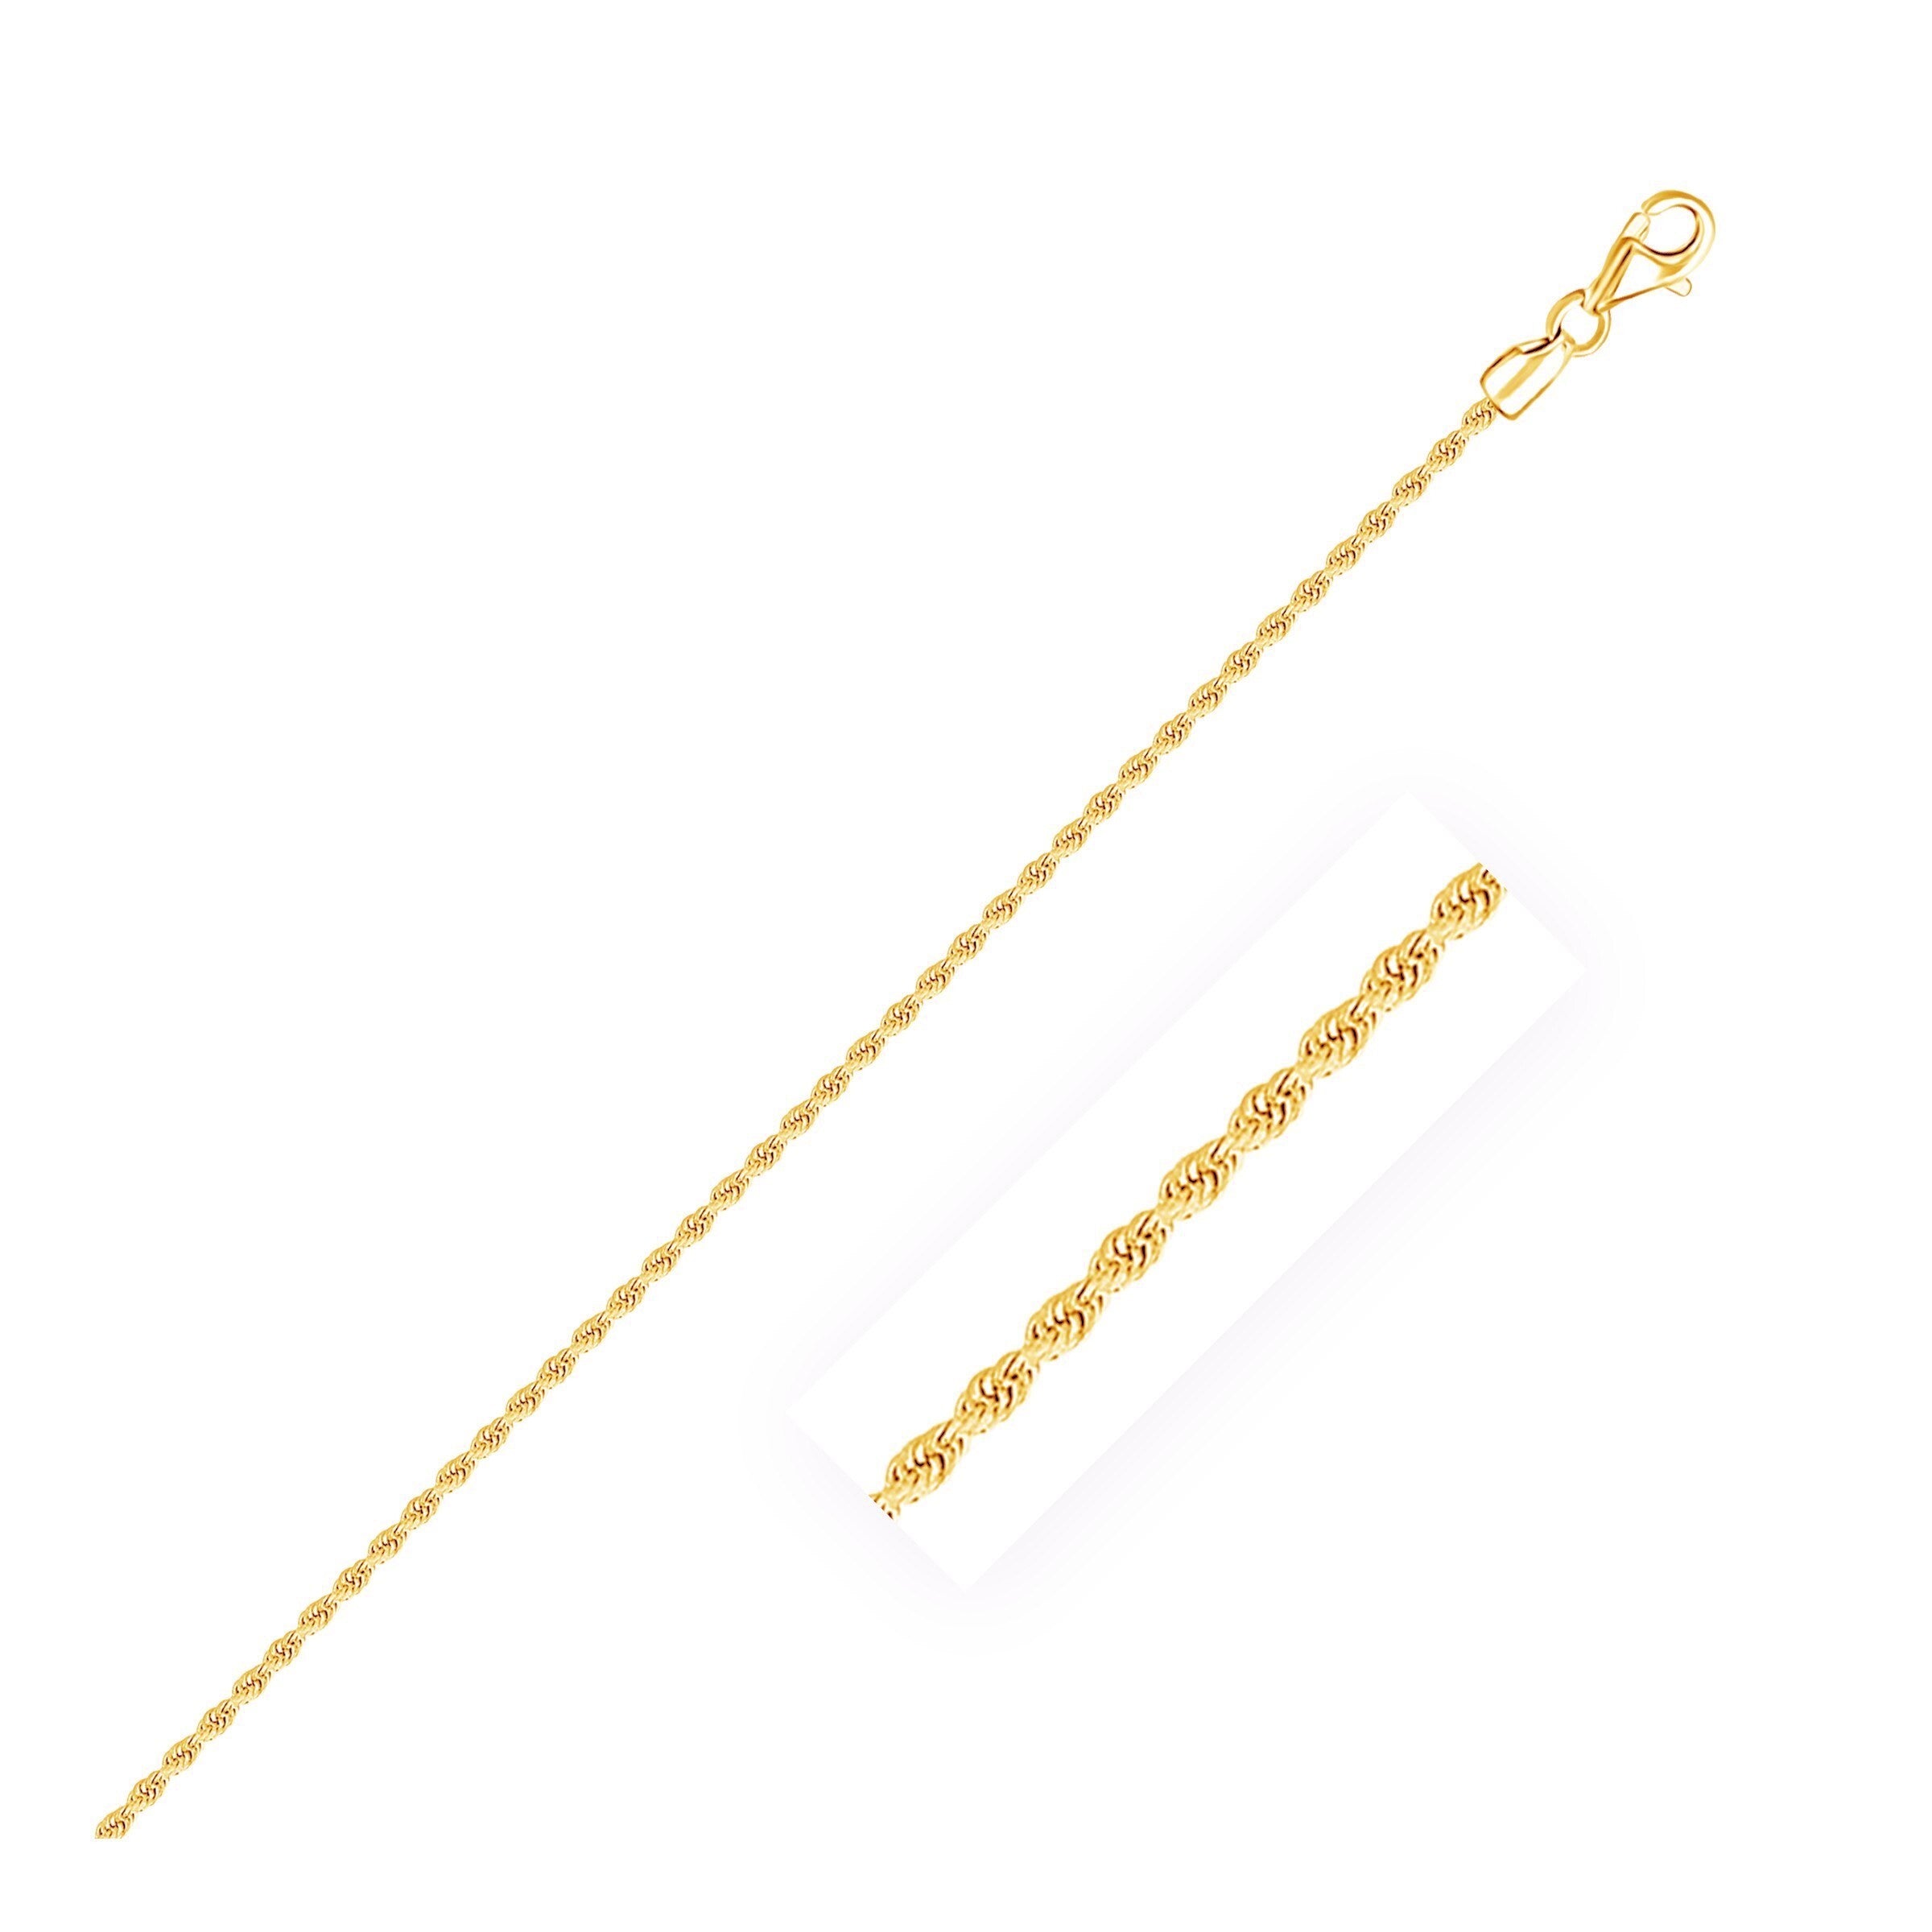 2.0mm 10k Yellow Gold Diamond Cut Rope Anklet, size 10''